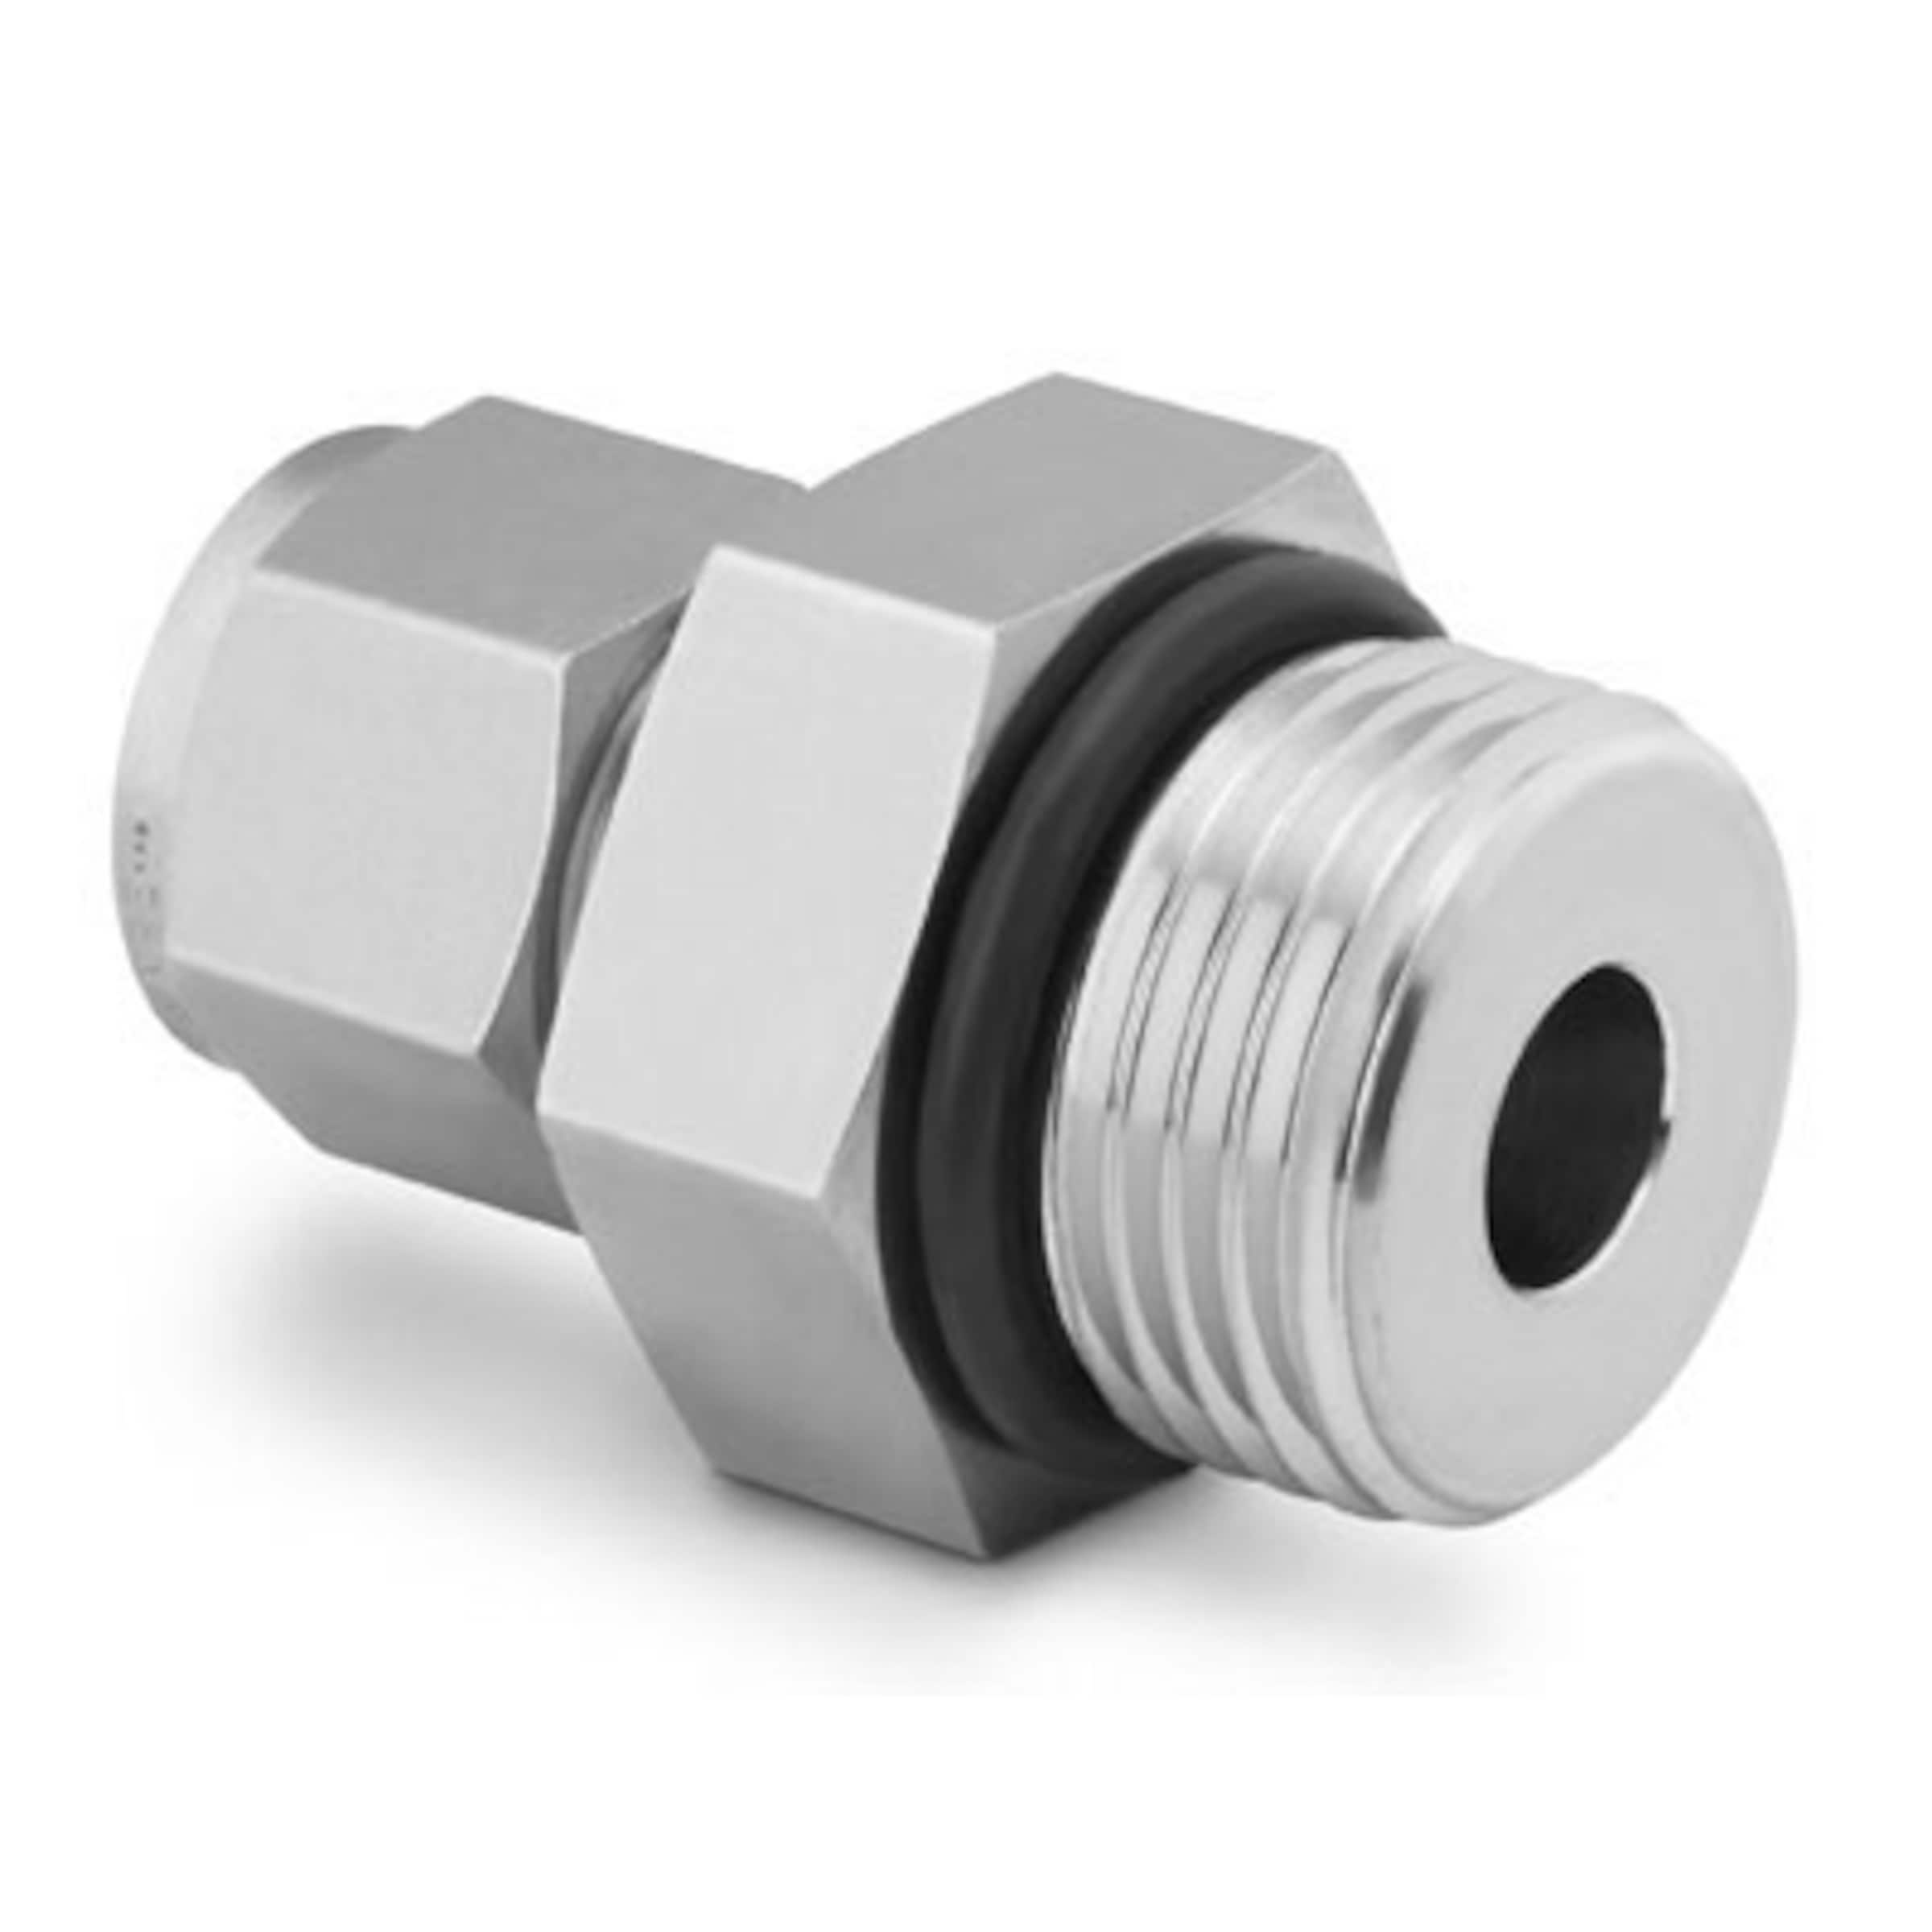 Stainless Steel Swagelok Tube Fitting, Male Connector, 1/4 in. Tube OD ...